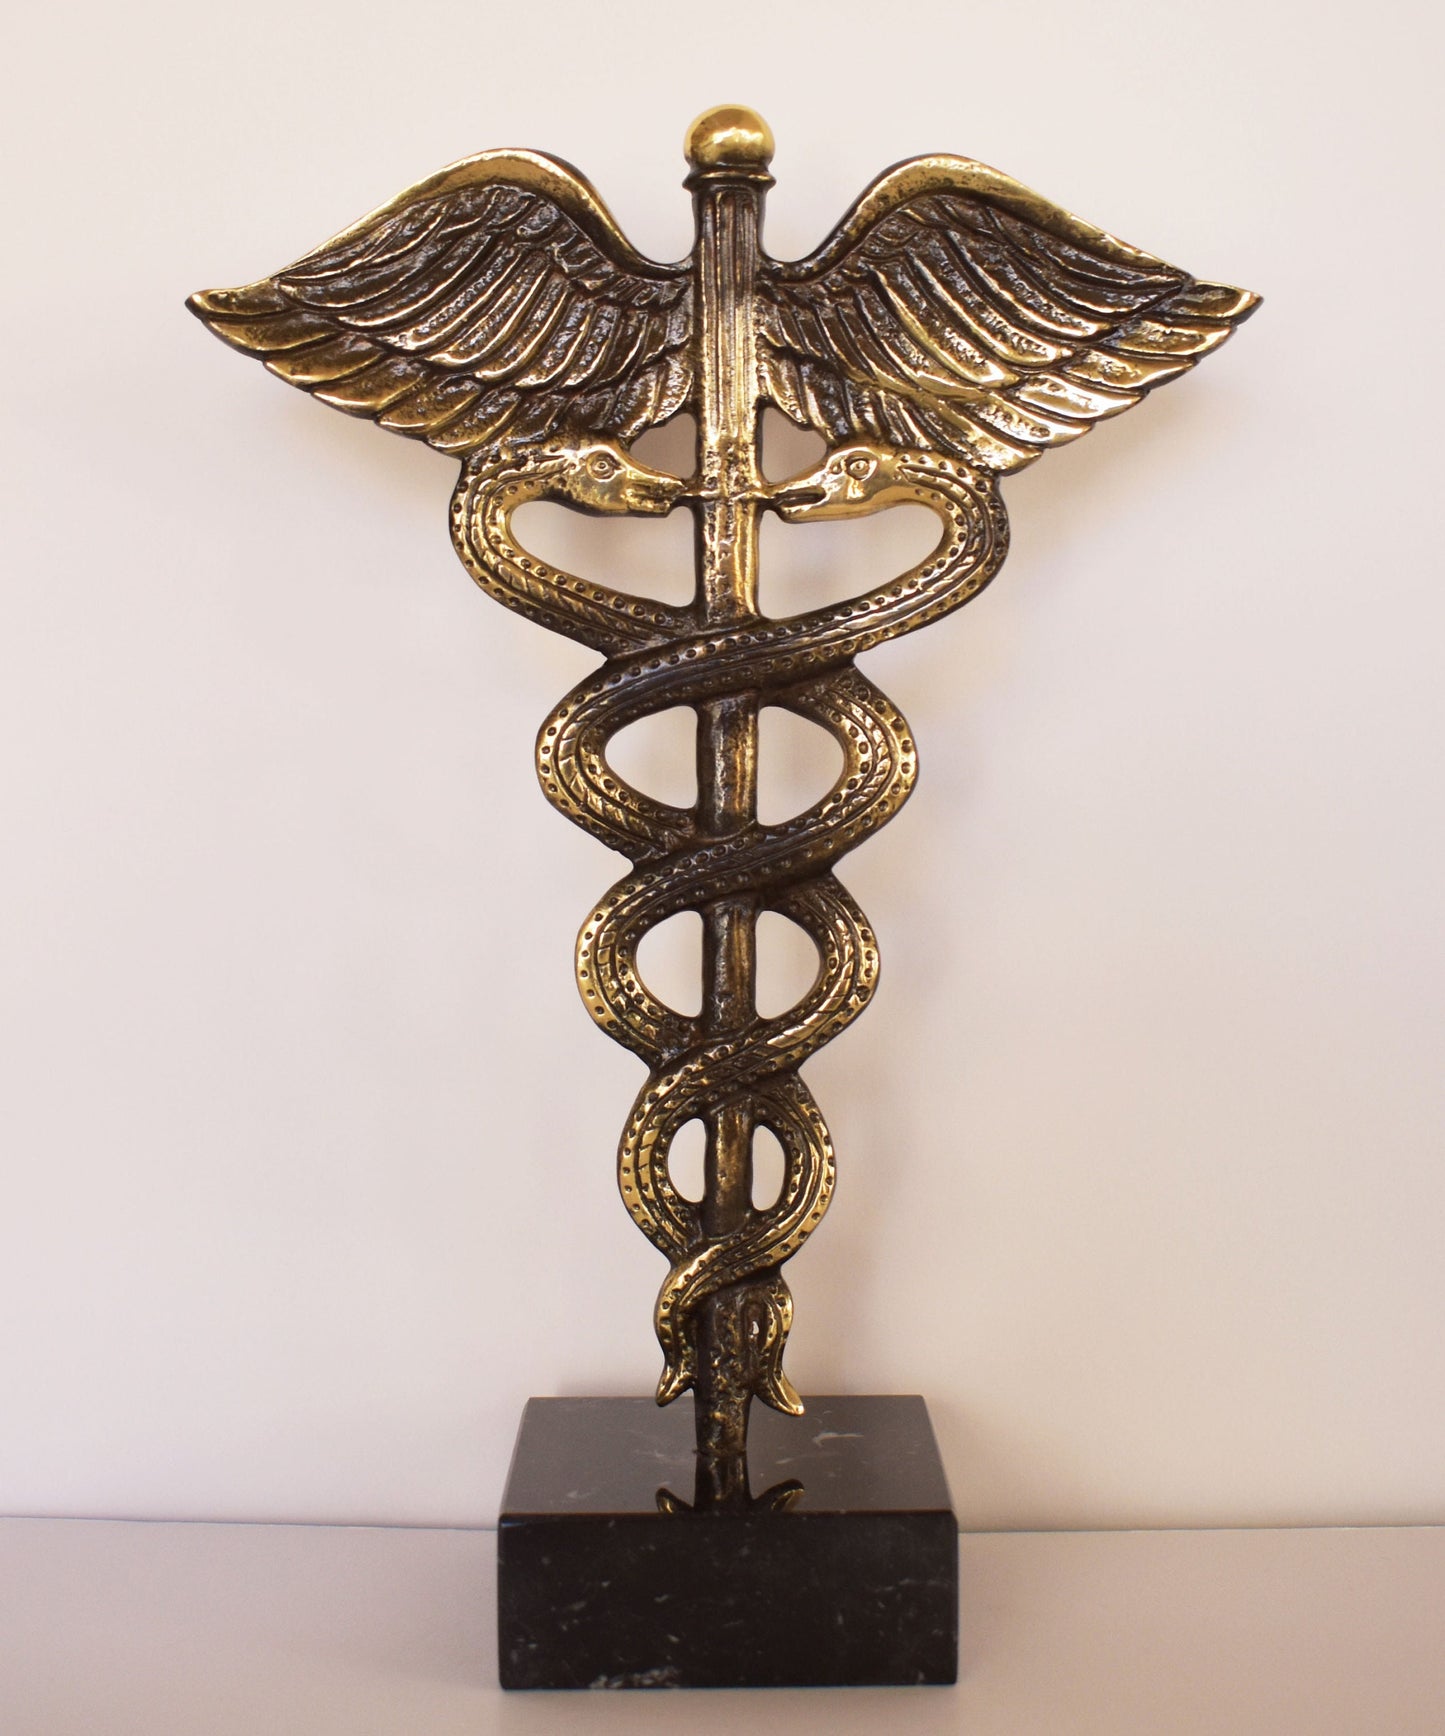 Caduceus - Symbol of God Hermes Mercury - Short Staff entwined by two Serpents, surmounted by Wings - pure bronze  statue